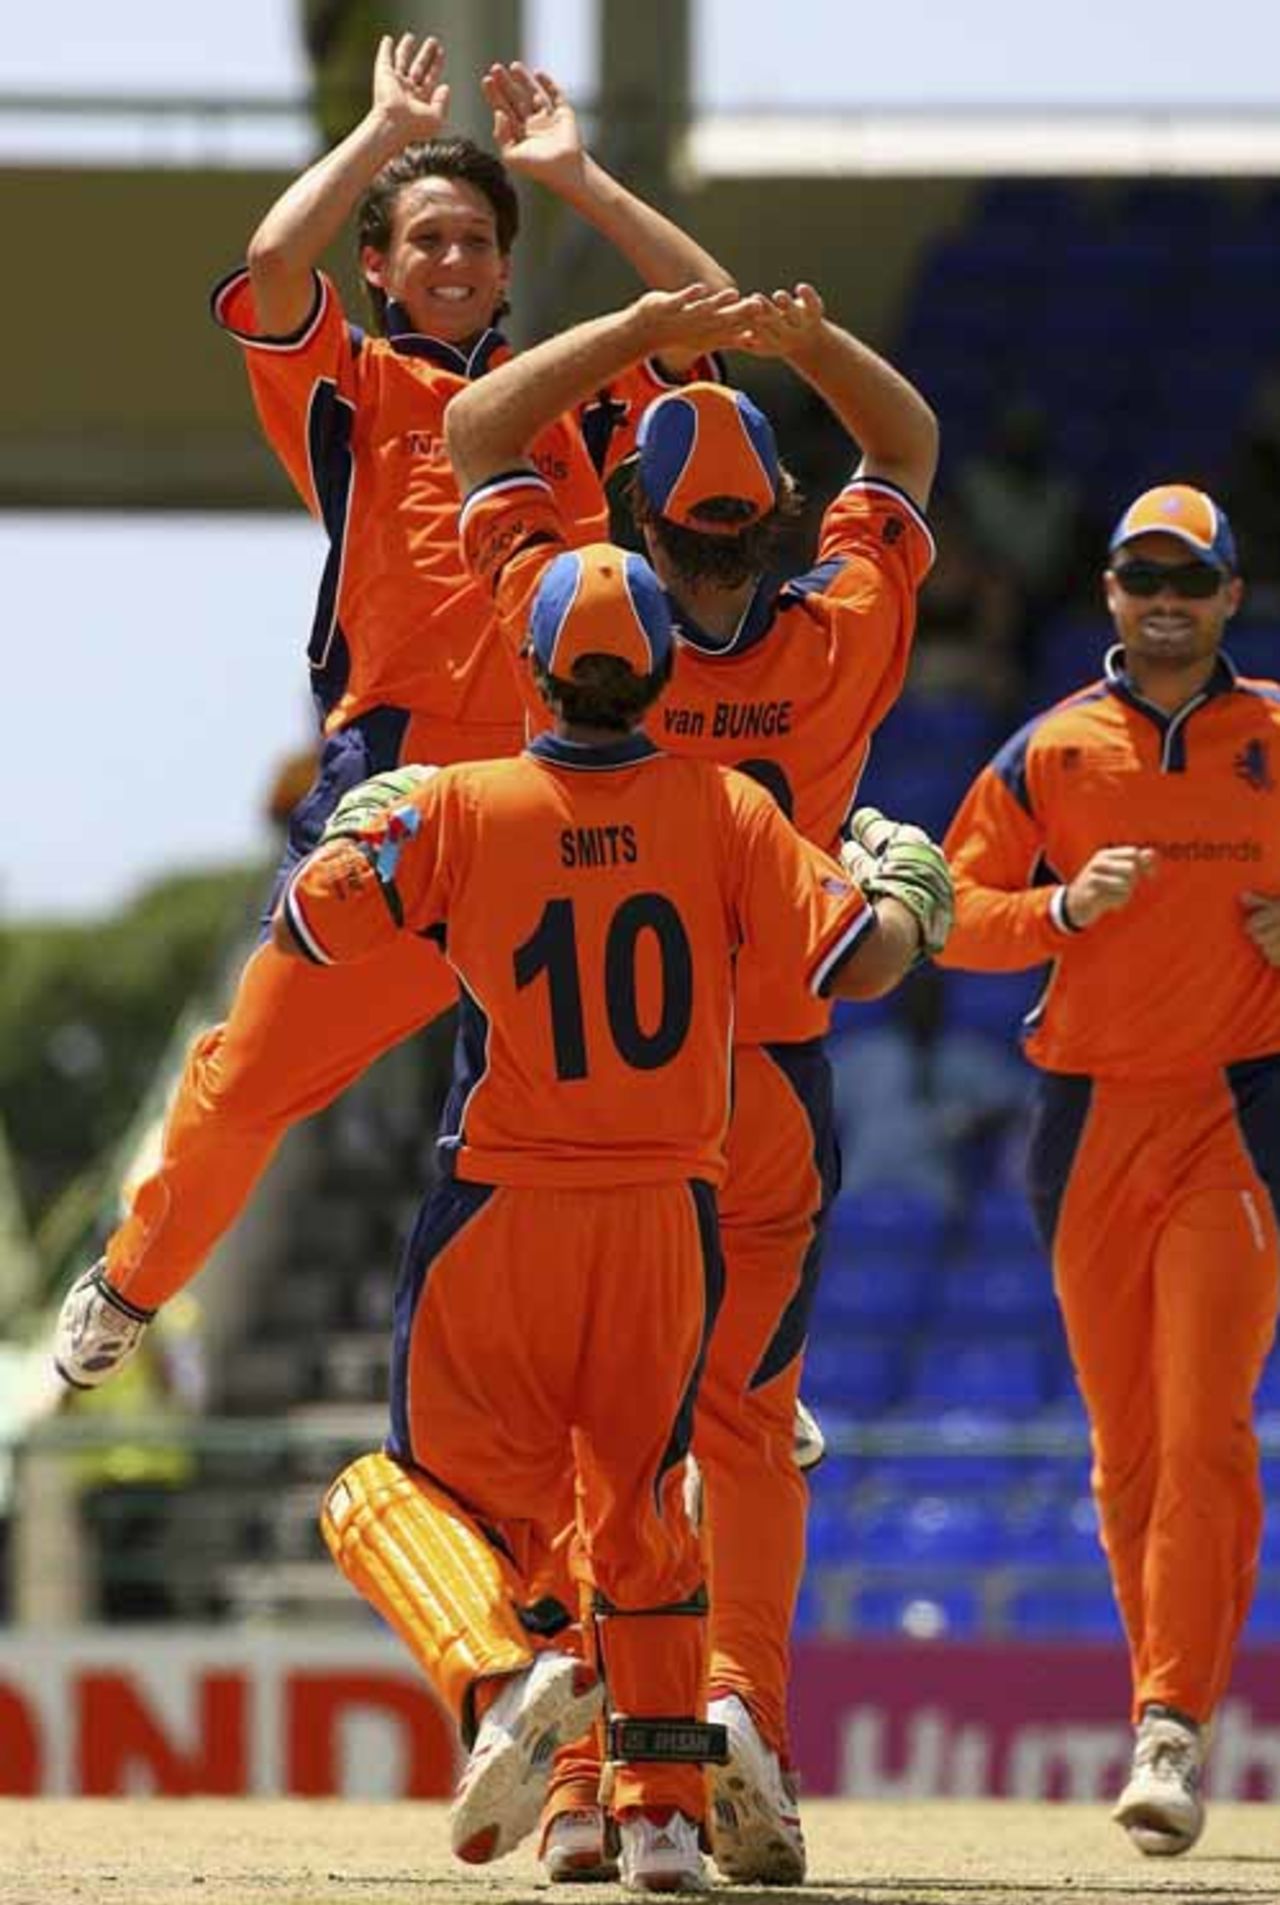 Mark Jonkman leaps into the air like an athlete, his joy at getting a wicket clearly knew no bounds, Netherlands v Scotland, Group A, St Kitts, March 22, 2007